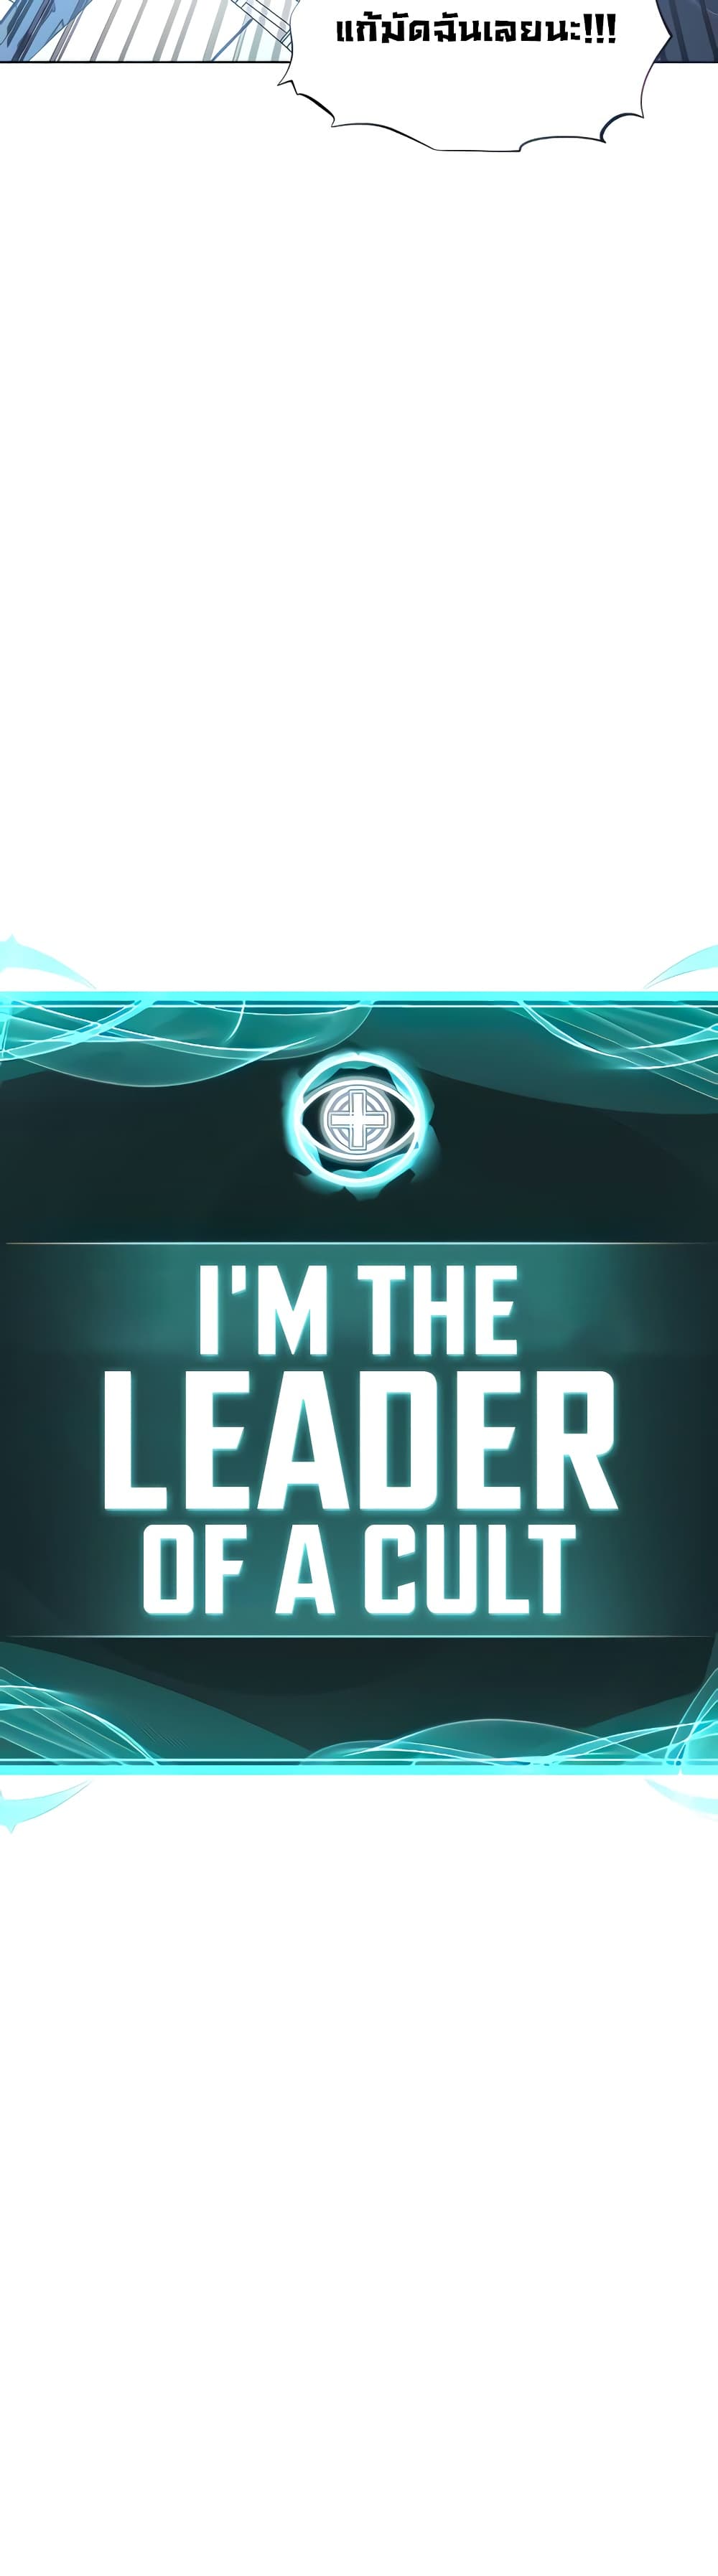 I’m The Leader Of A Cult 6-6